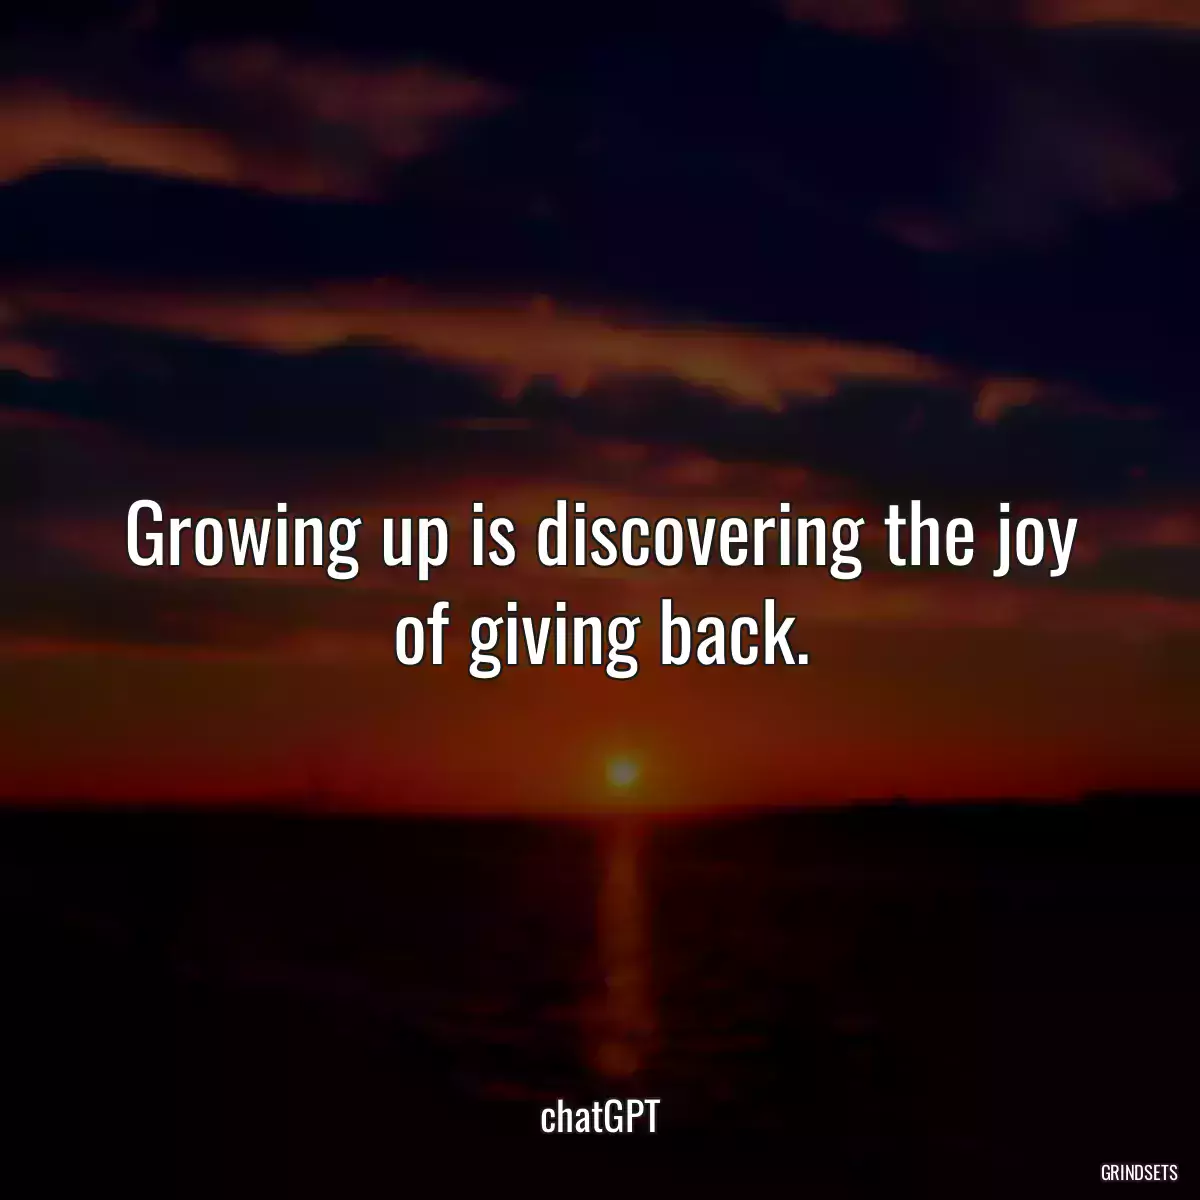 Growing up is discovering the joy of giving back.